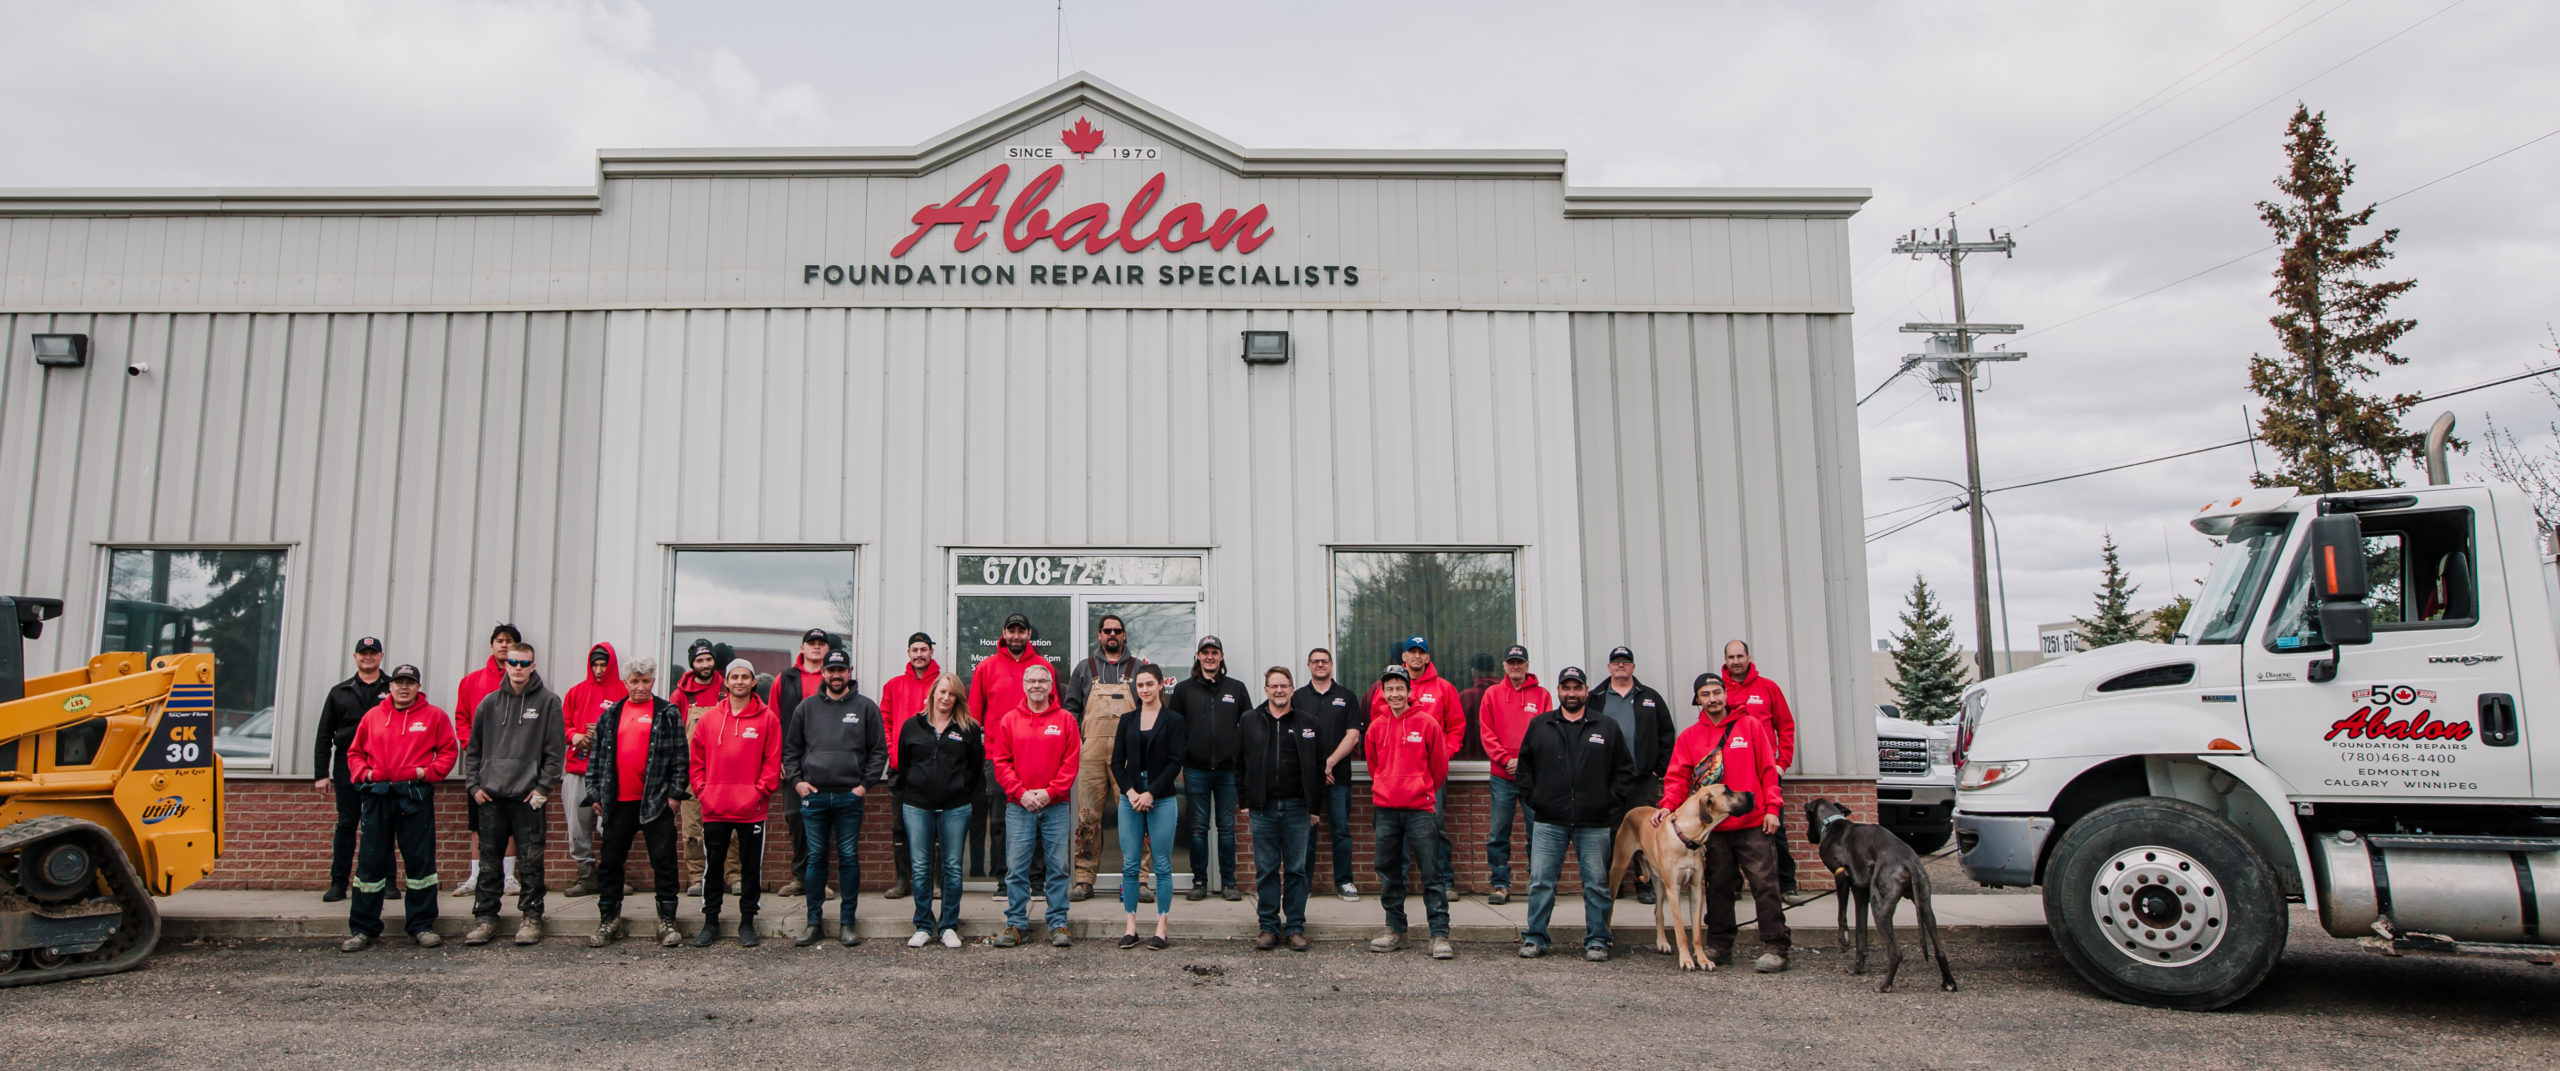 Abalon Construction  - Edmonton foundation repair experts - photo of team in front entrance